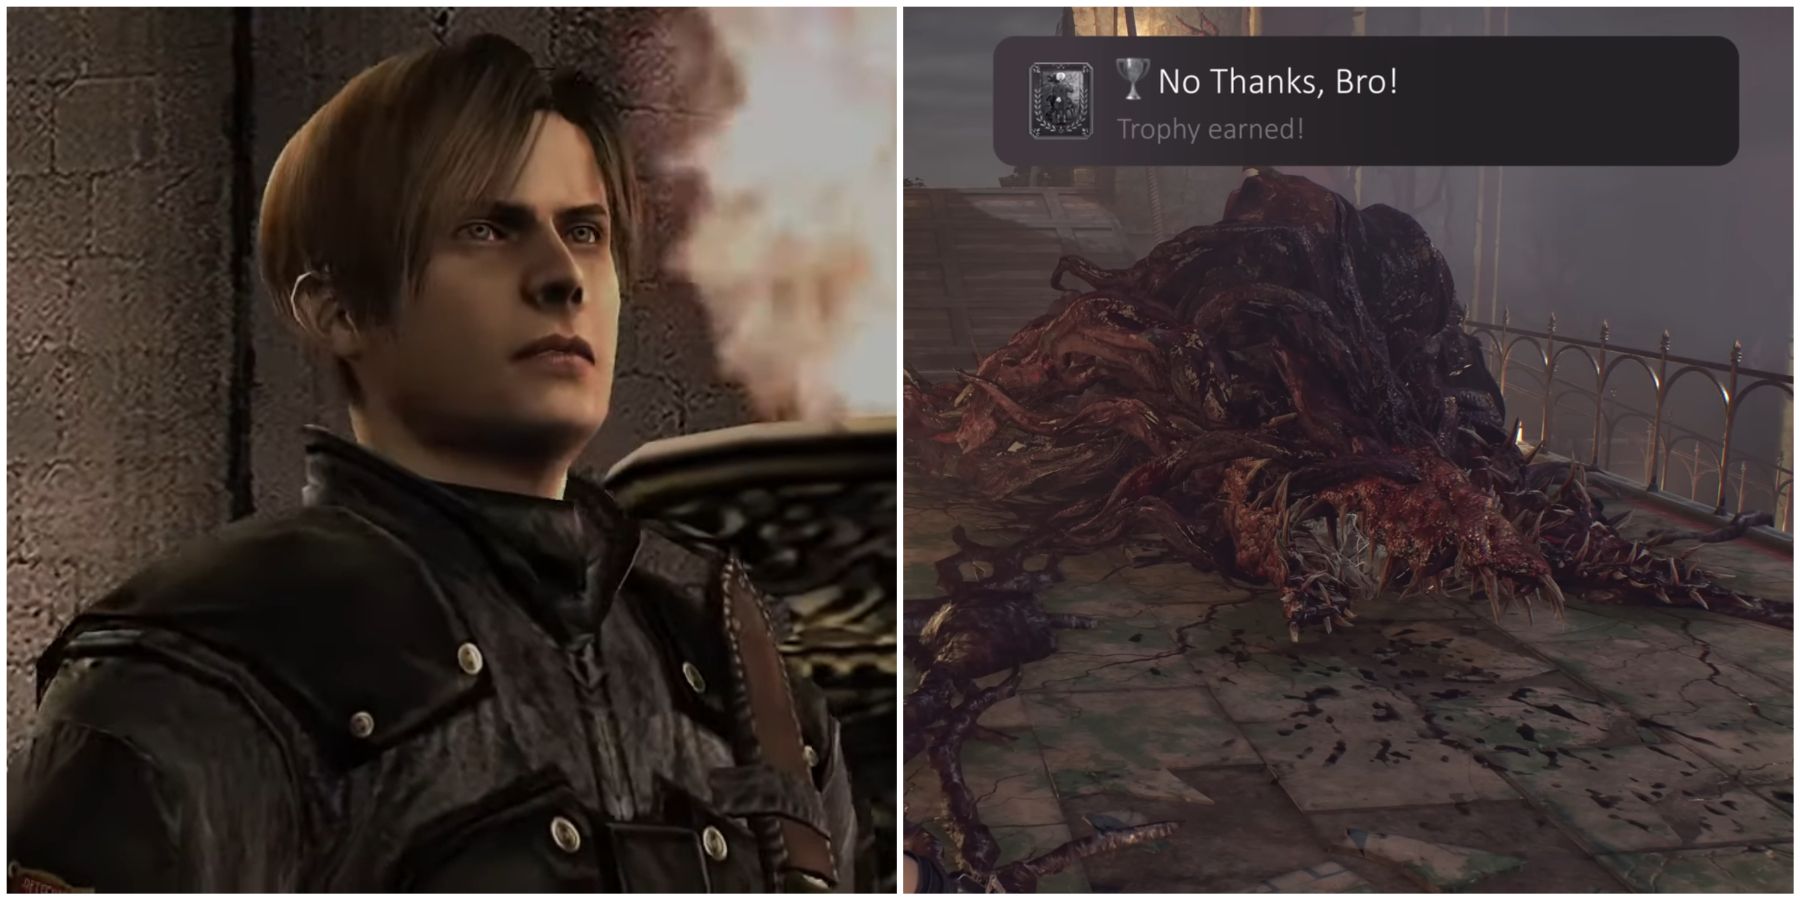 Leon looking at The "No Thanks, Bro!" trophy Resident Evil 4 Remake